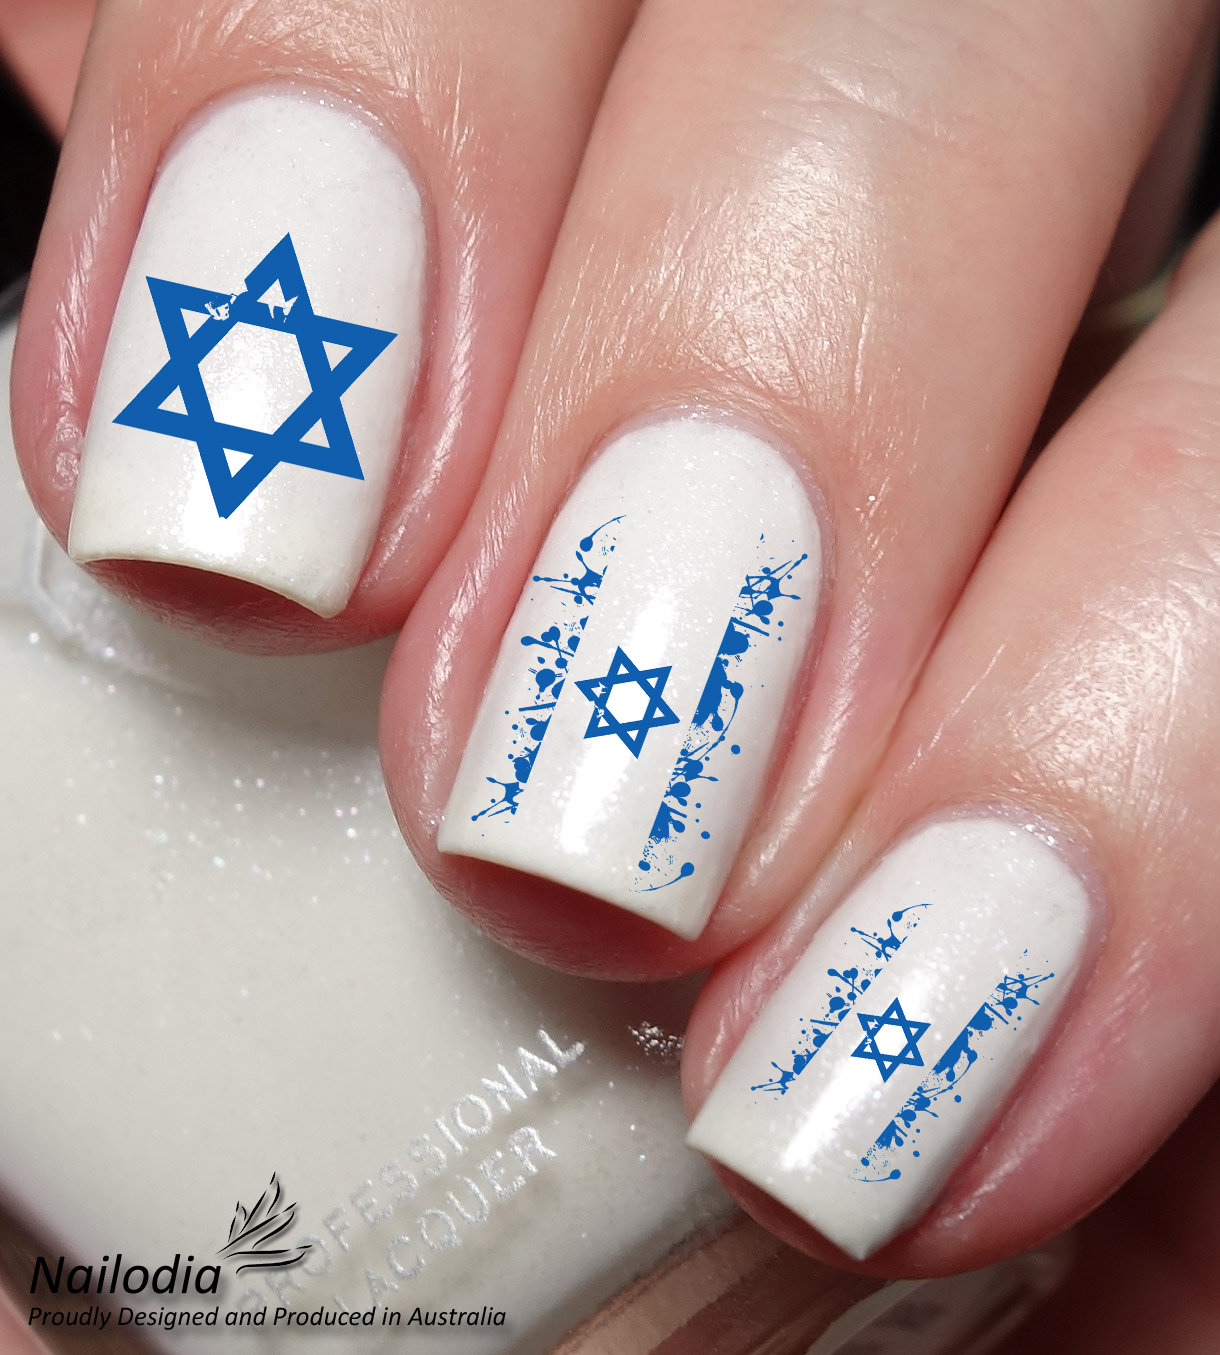 Inspired By A Flag : Day 28, The 31 Day Nail Art Challenge